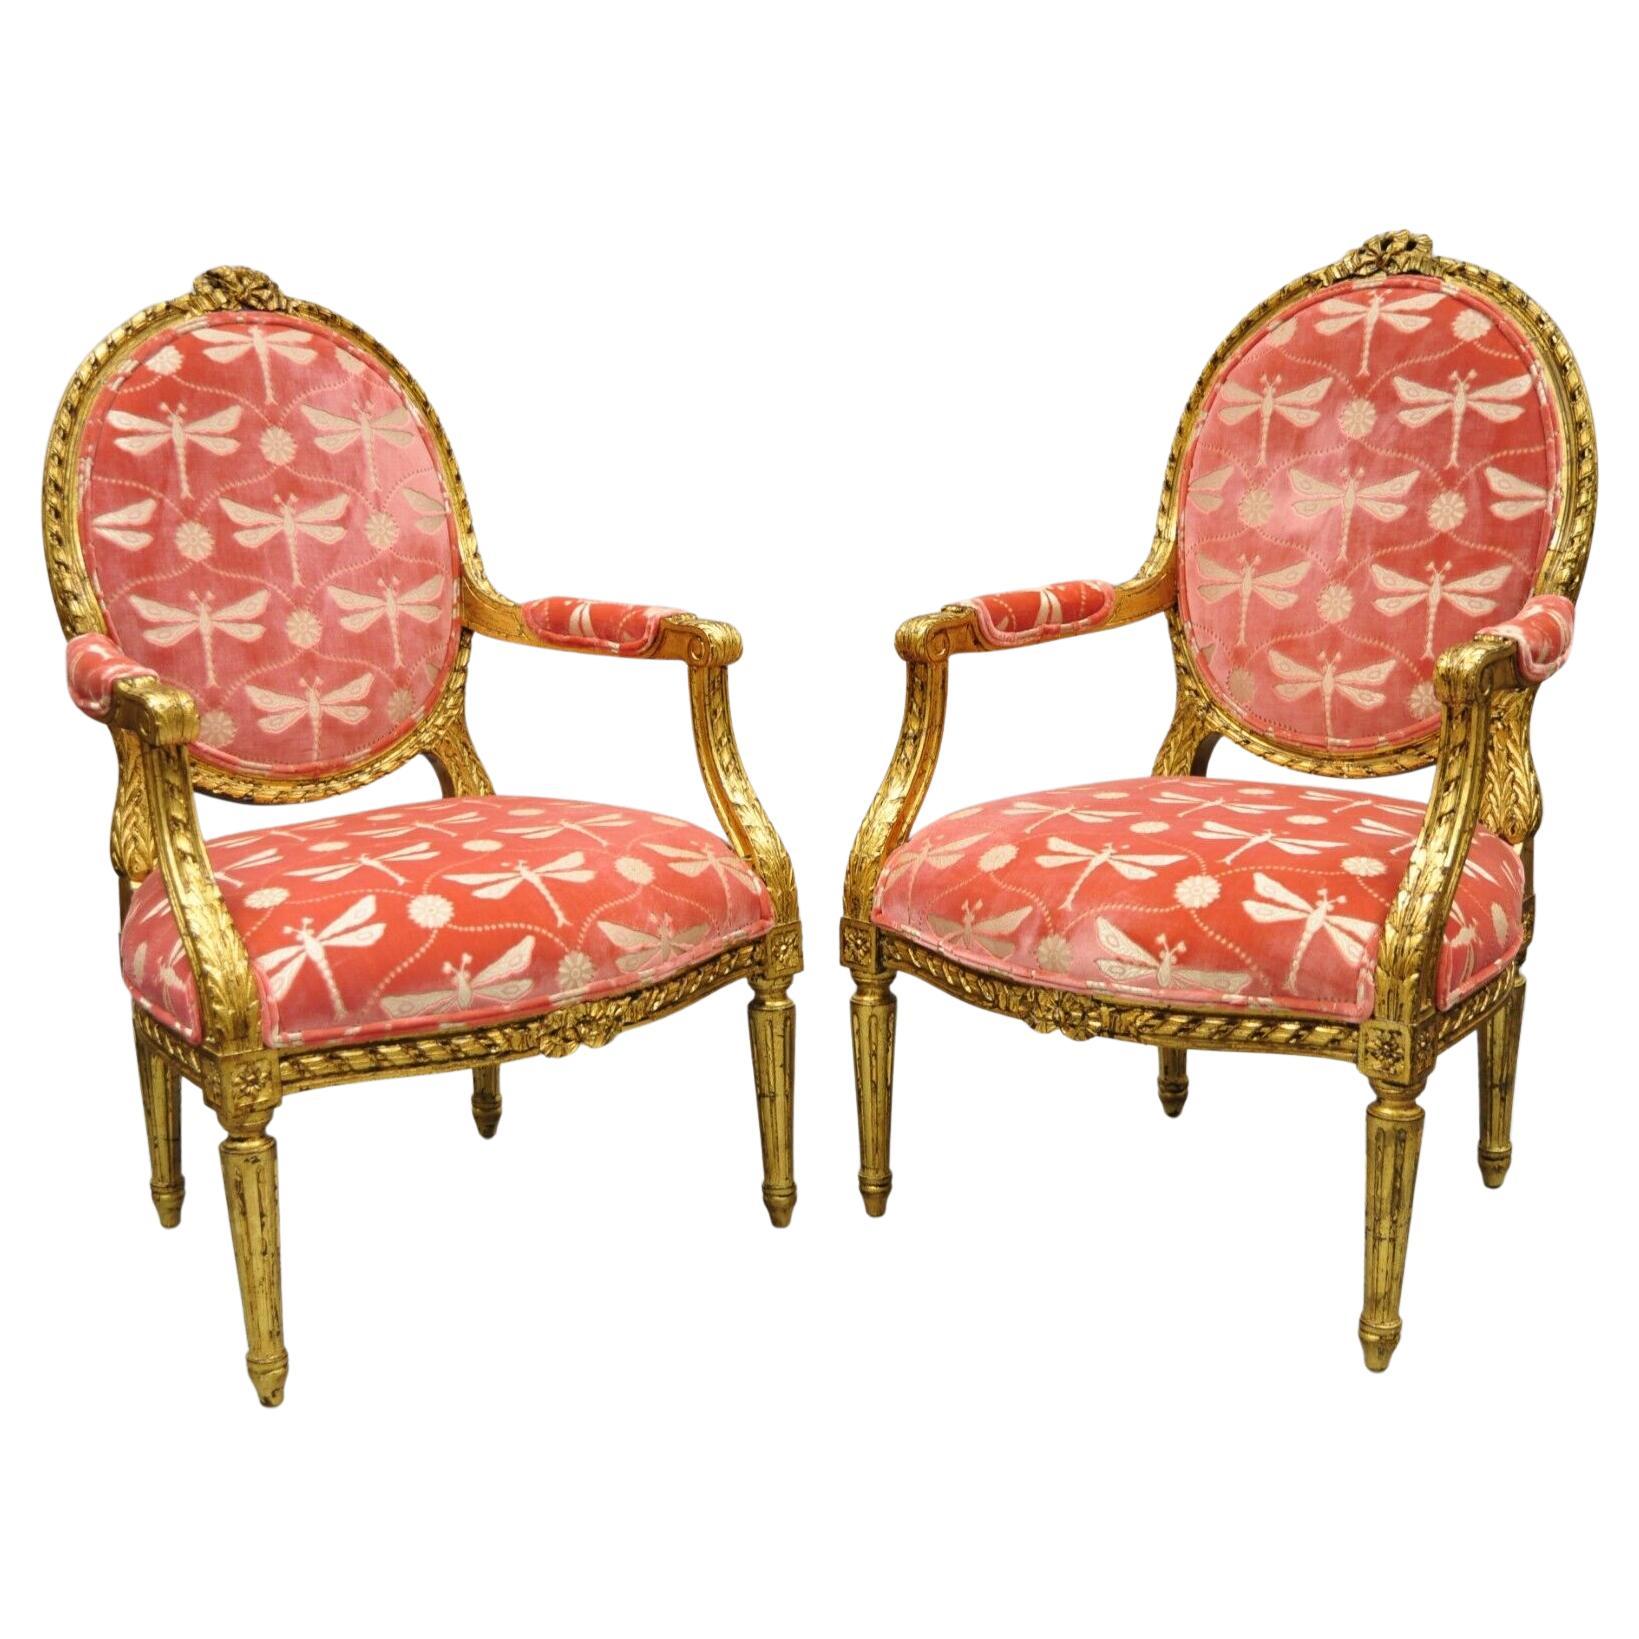 Vintage French Louis XVI Style Gold Giltwood Pink Arm Chairs - a Pair           